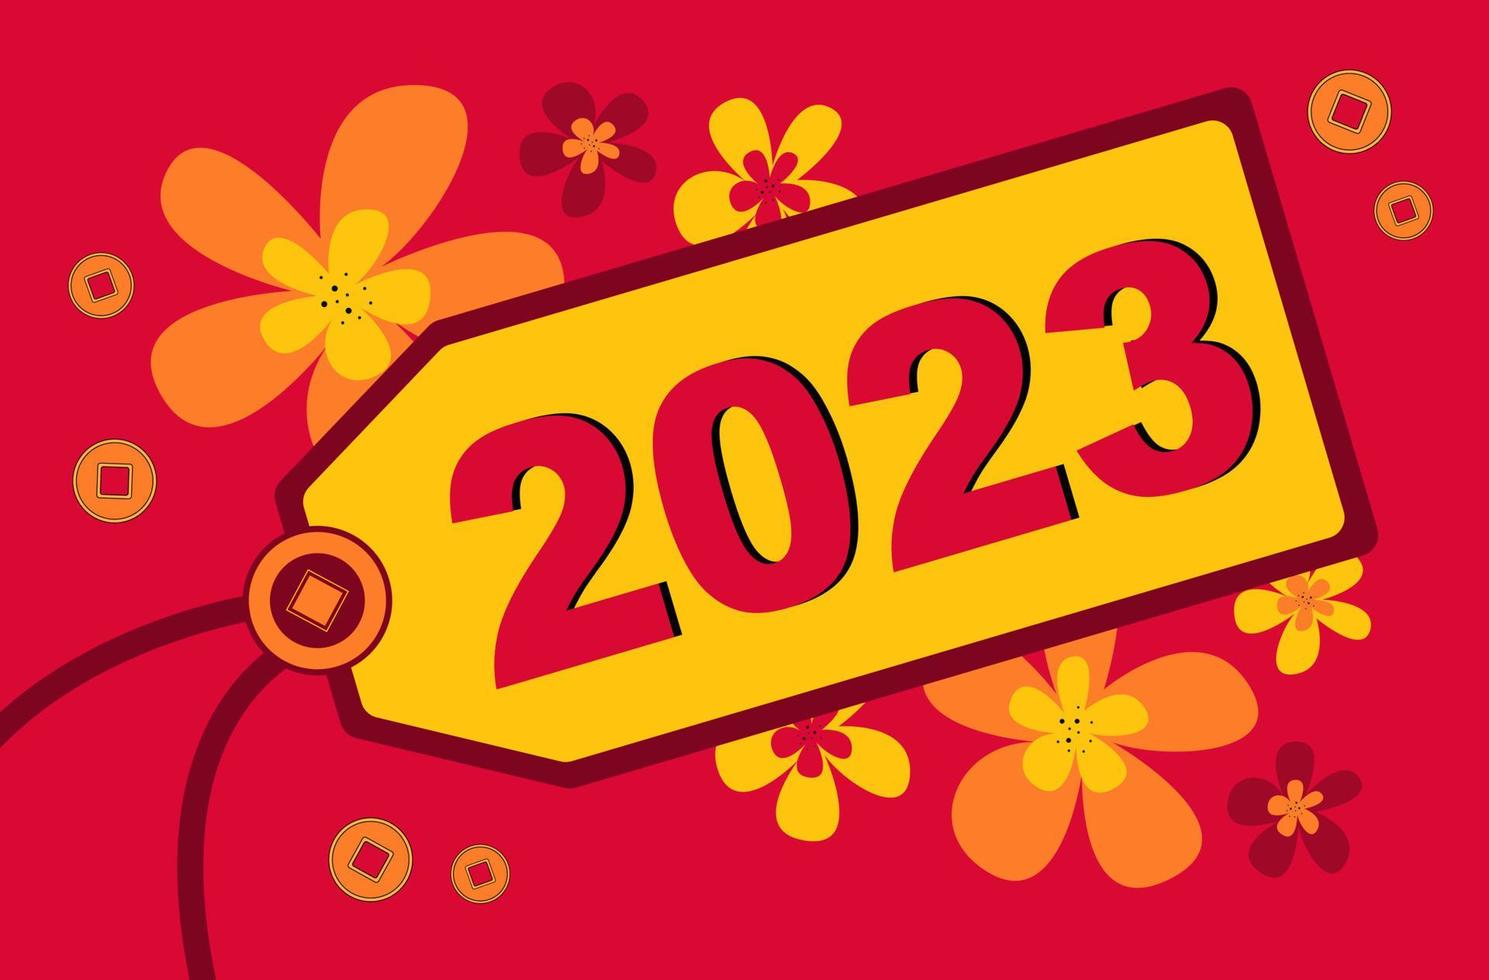 Chinese New Year. It says 2023 on the label. Flowers in the background vector